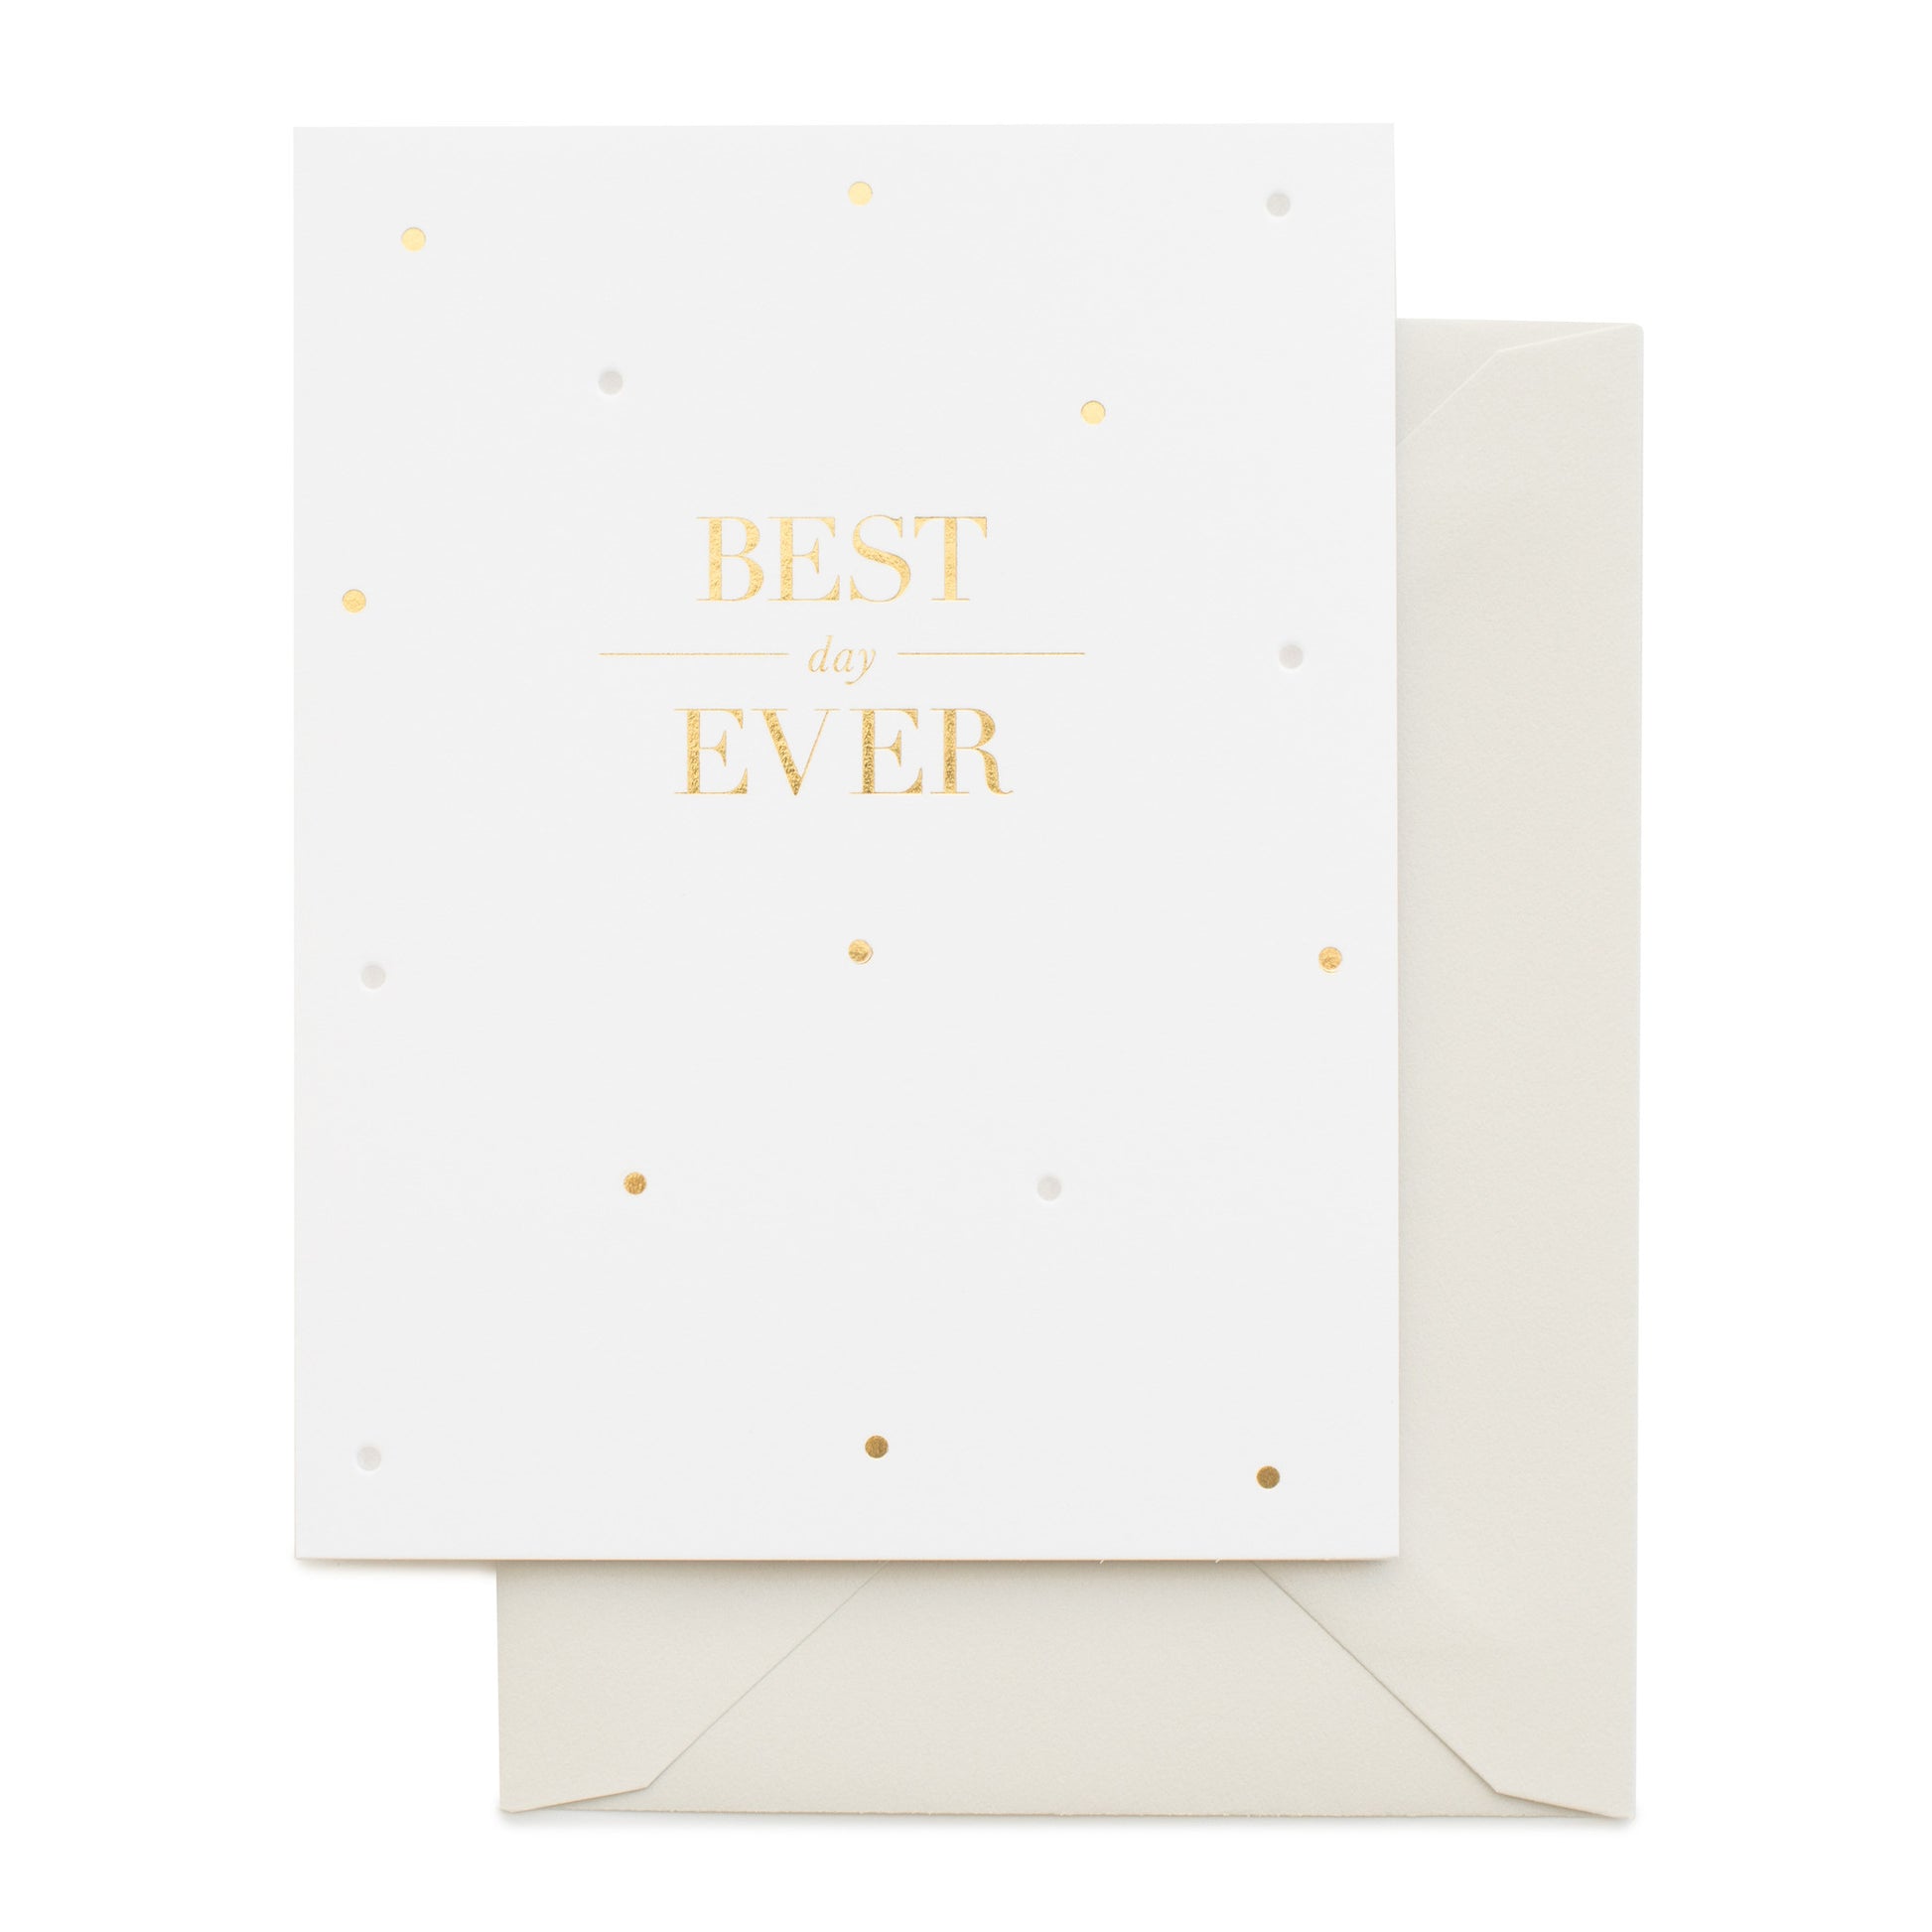 White greeting card printed in gold with "Best Day Ever" and a polka dot design paired with a grey envelope